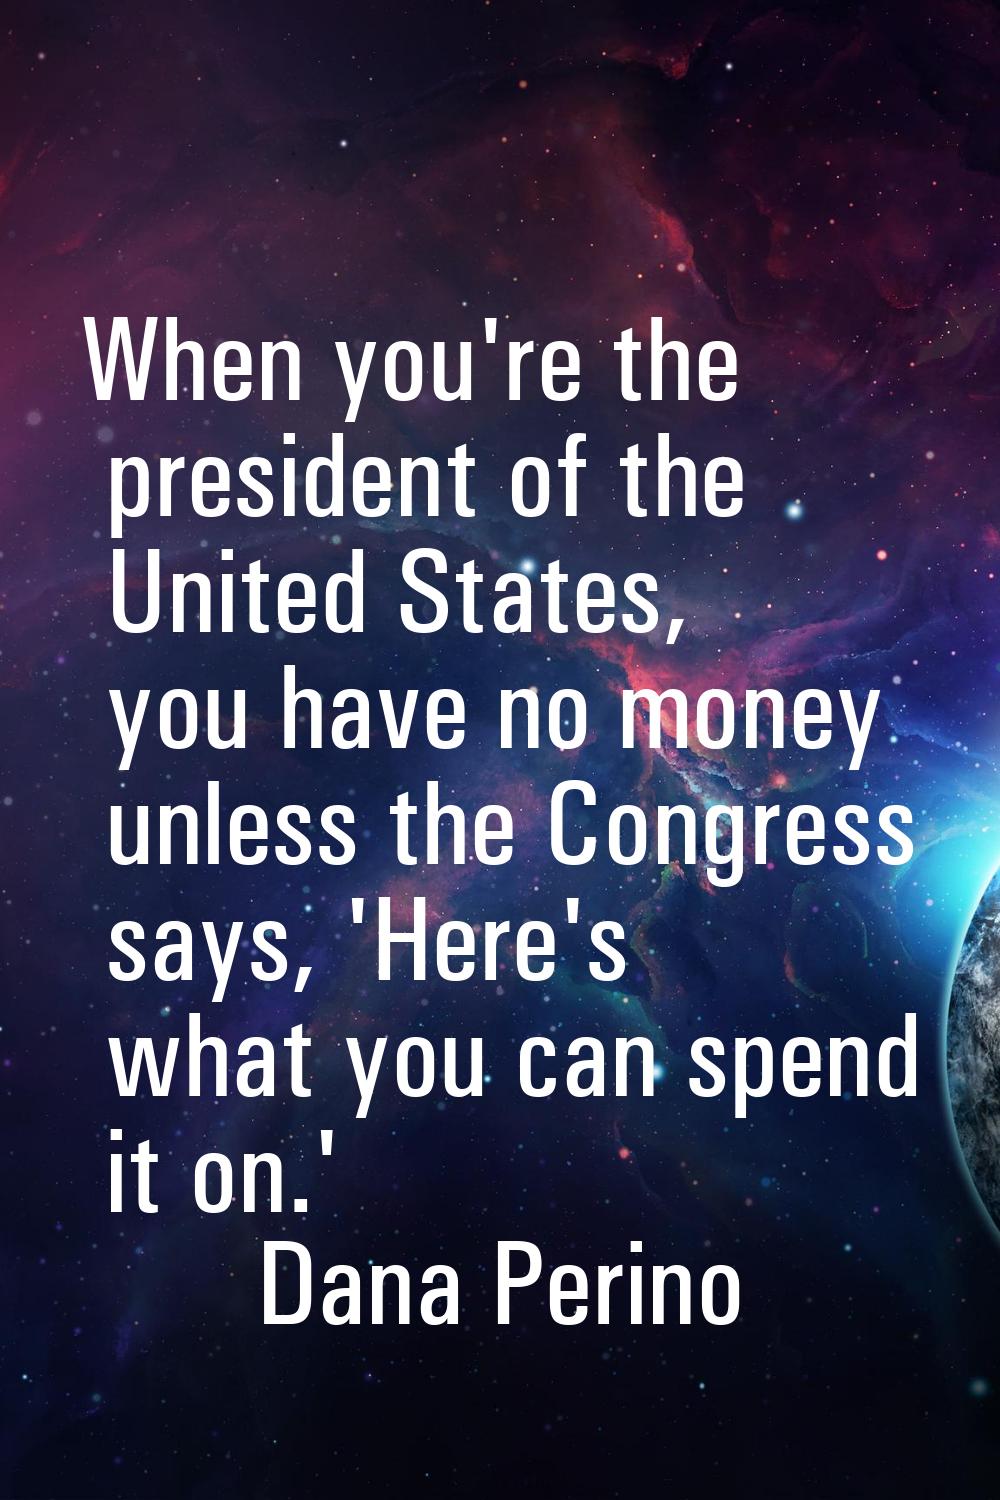 When you're the president of the United States, you have no money unless the Congress says, 'Here's